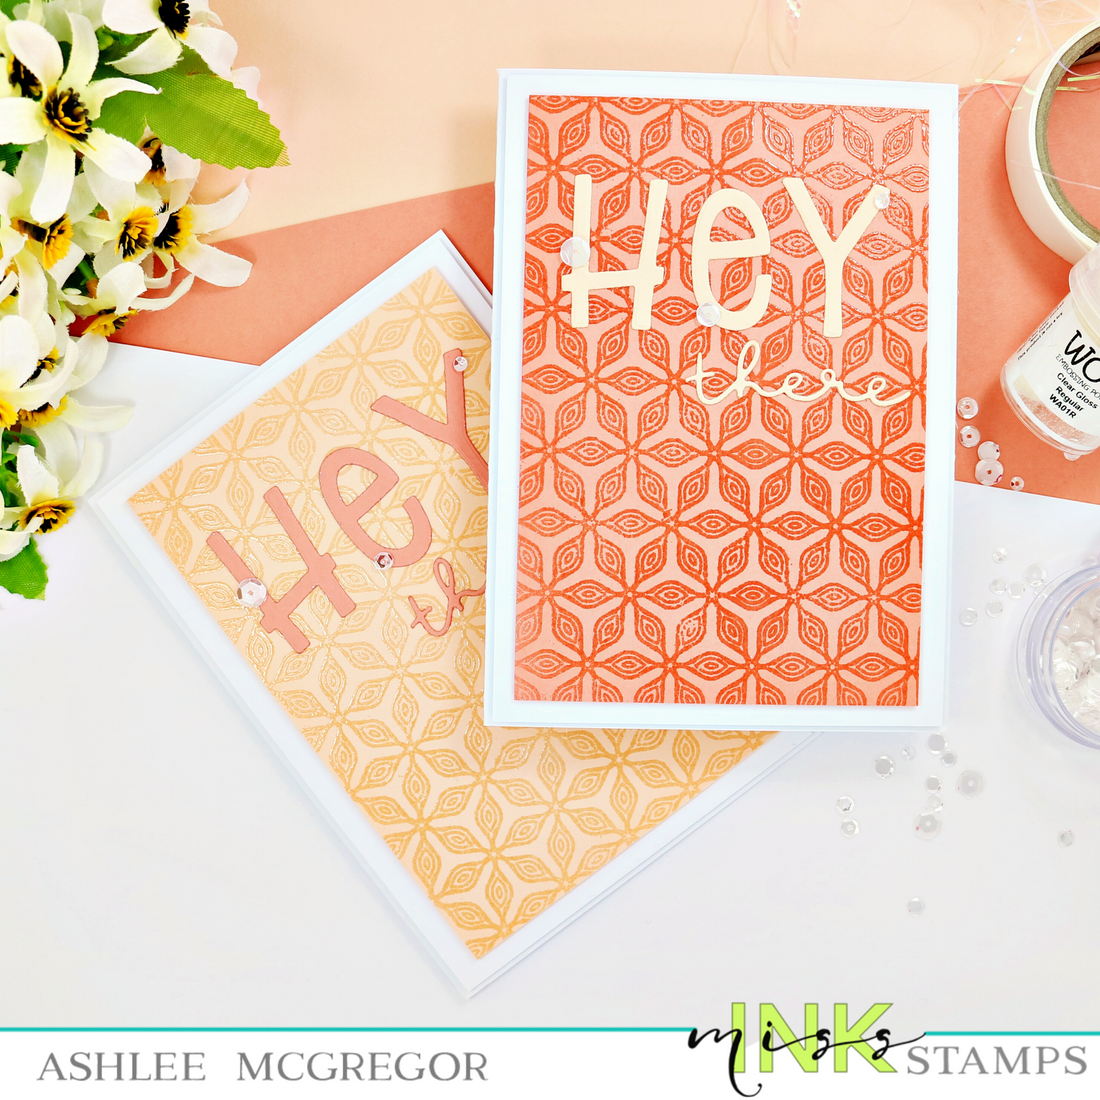 Background stamps and clear embossing!!